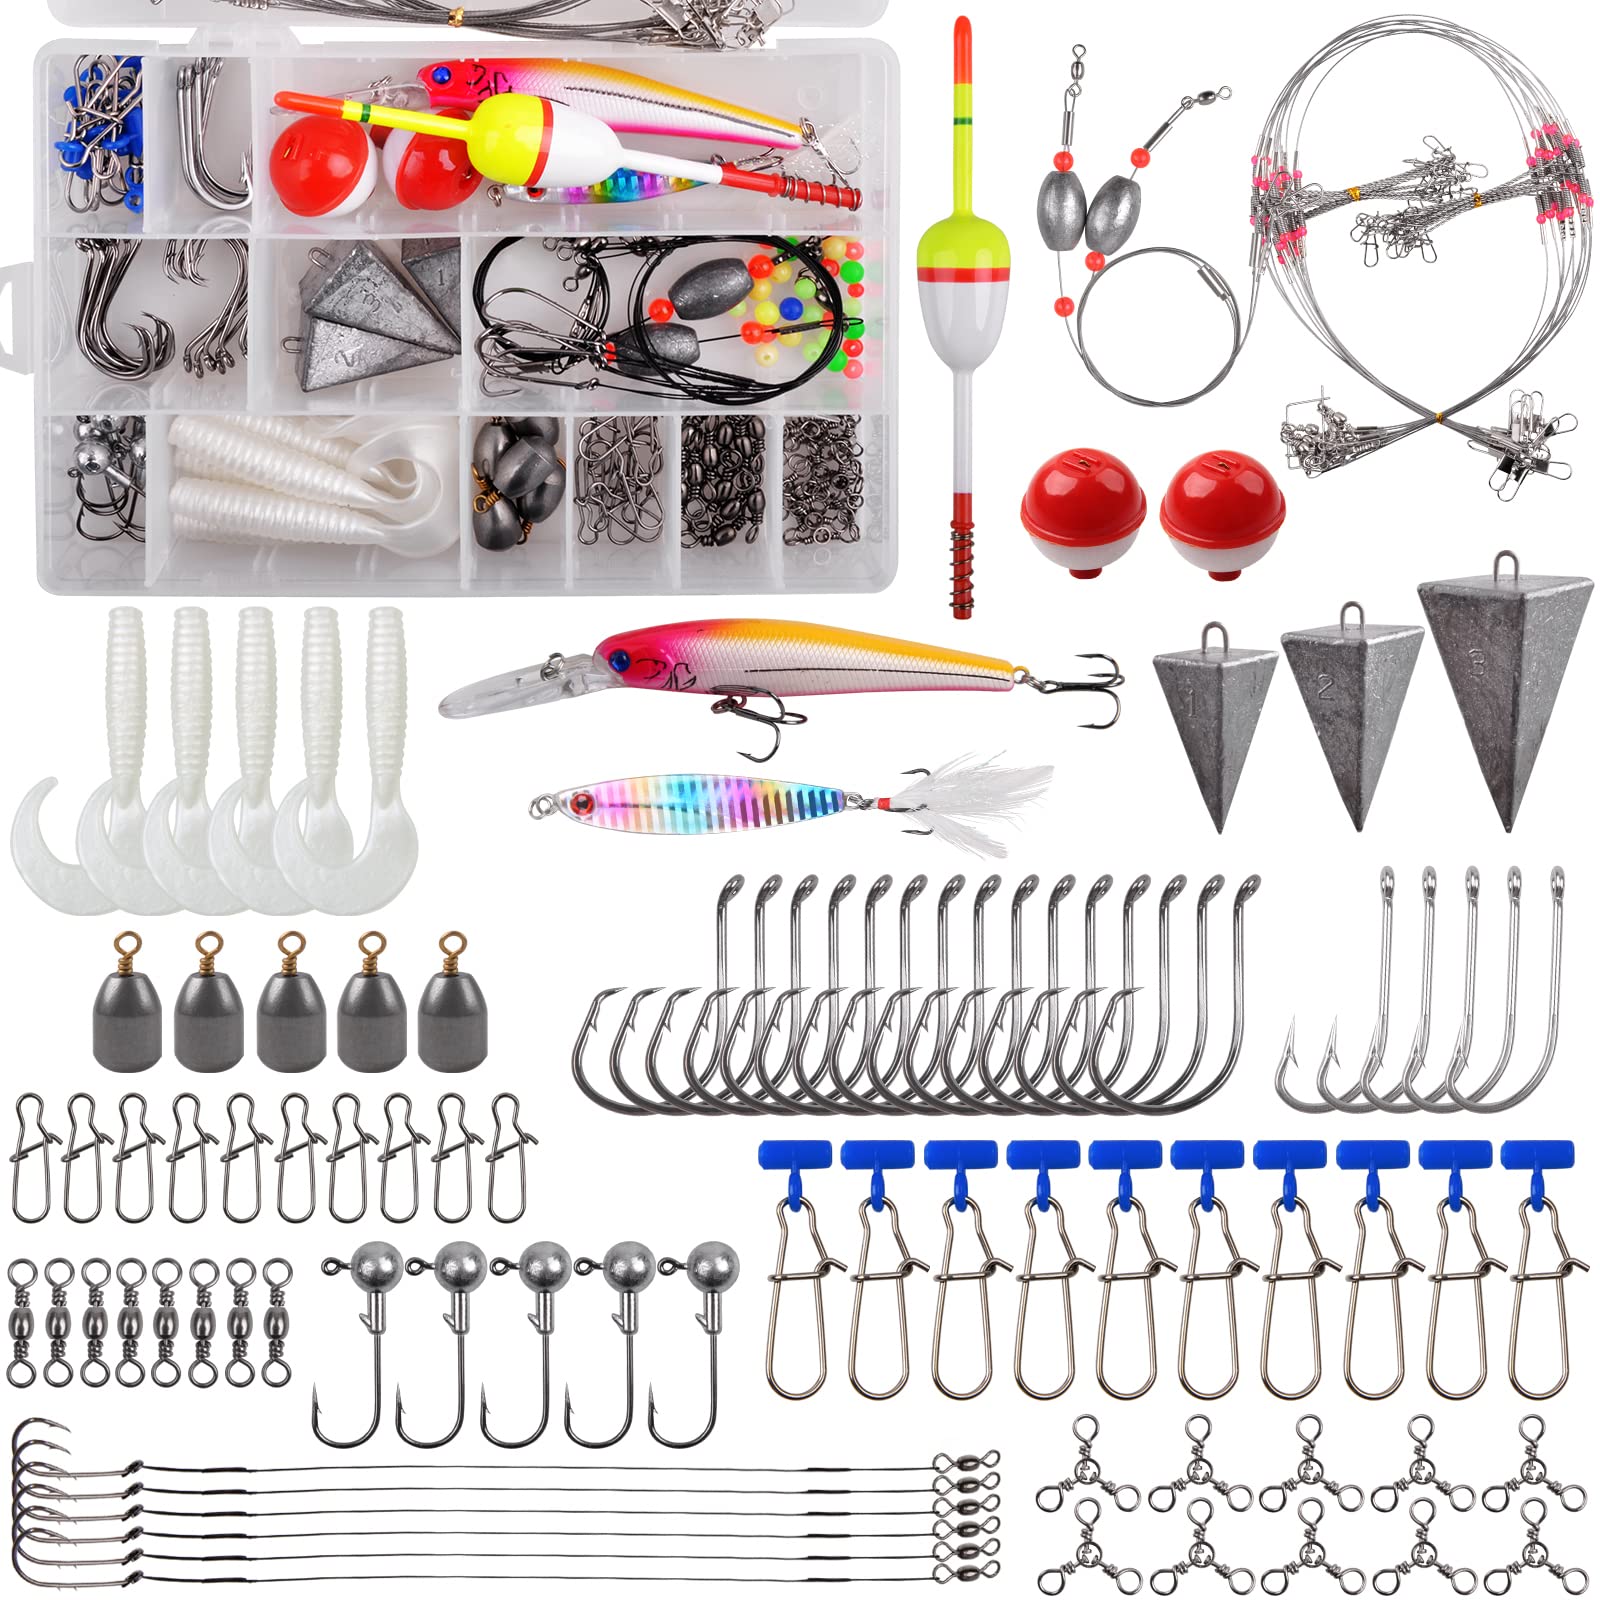 Saltwater Fishing Surf Fishing Rigs Tackle Kit - 138pcs Include Pyramid  Sinkers Saltwater Fishing Lures Hooks Leaders